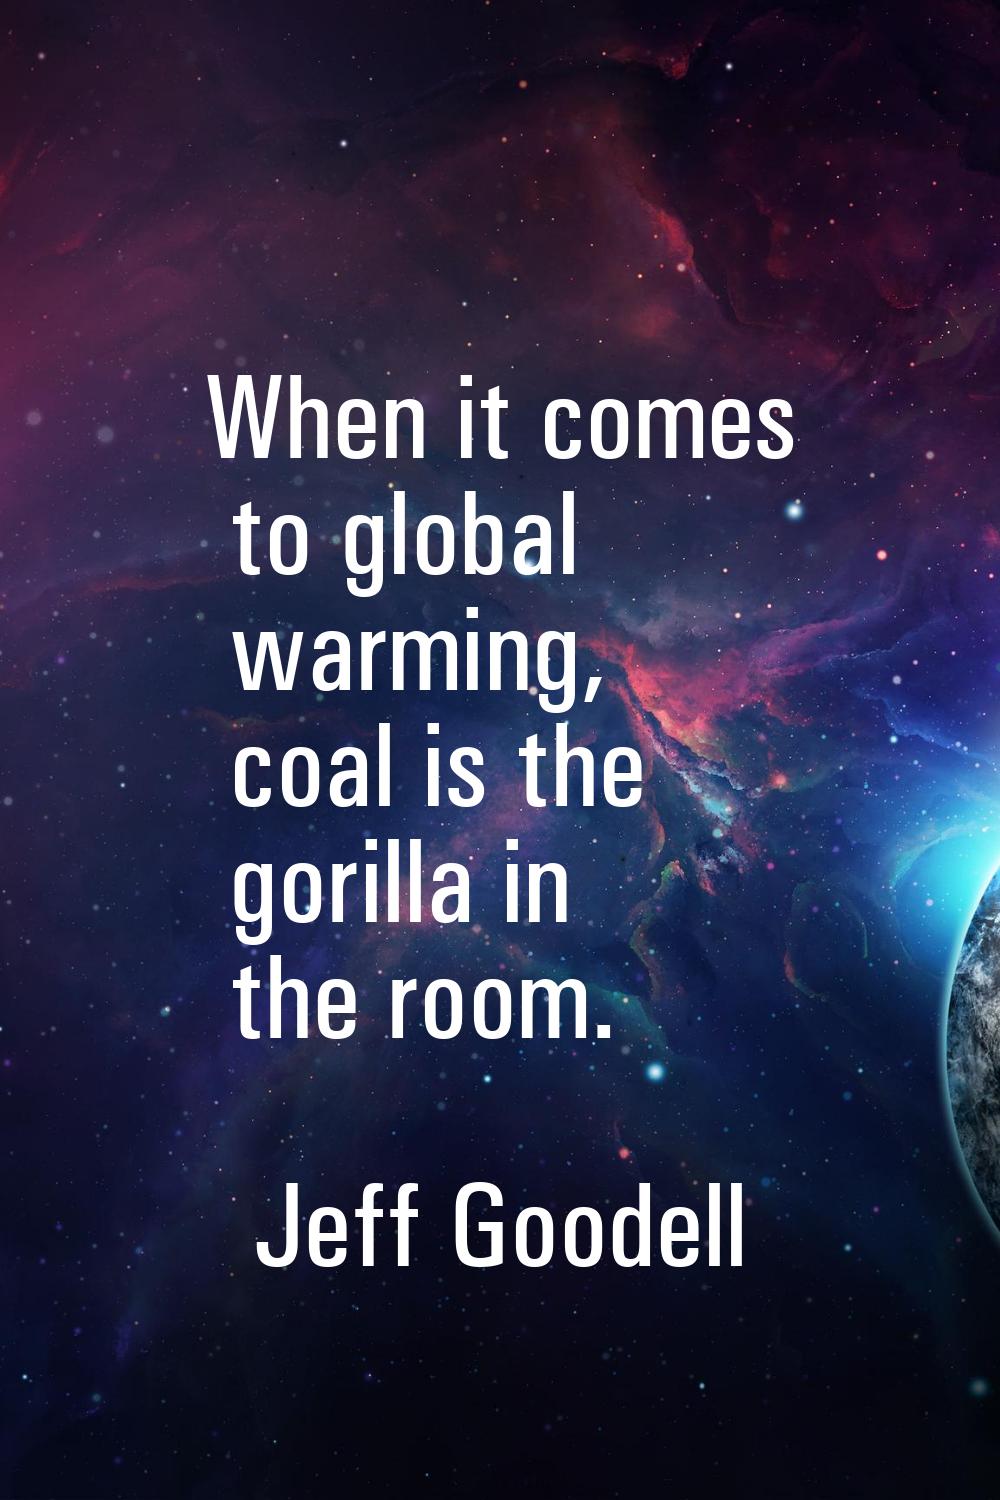 When it comes to global warming, coal is the gorilla in the room.